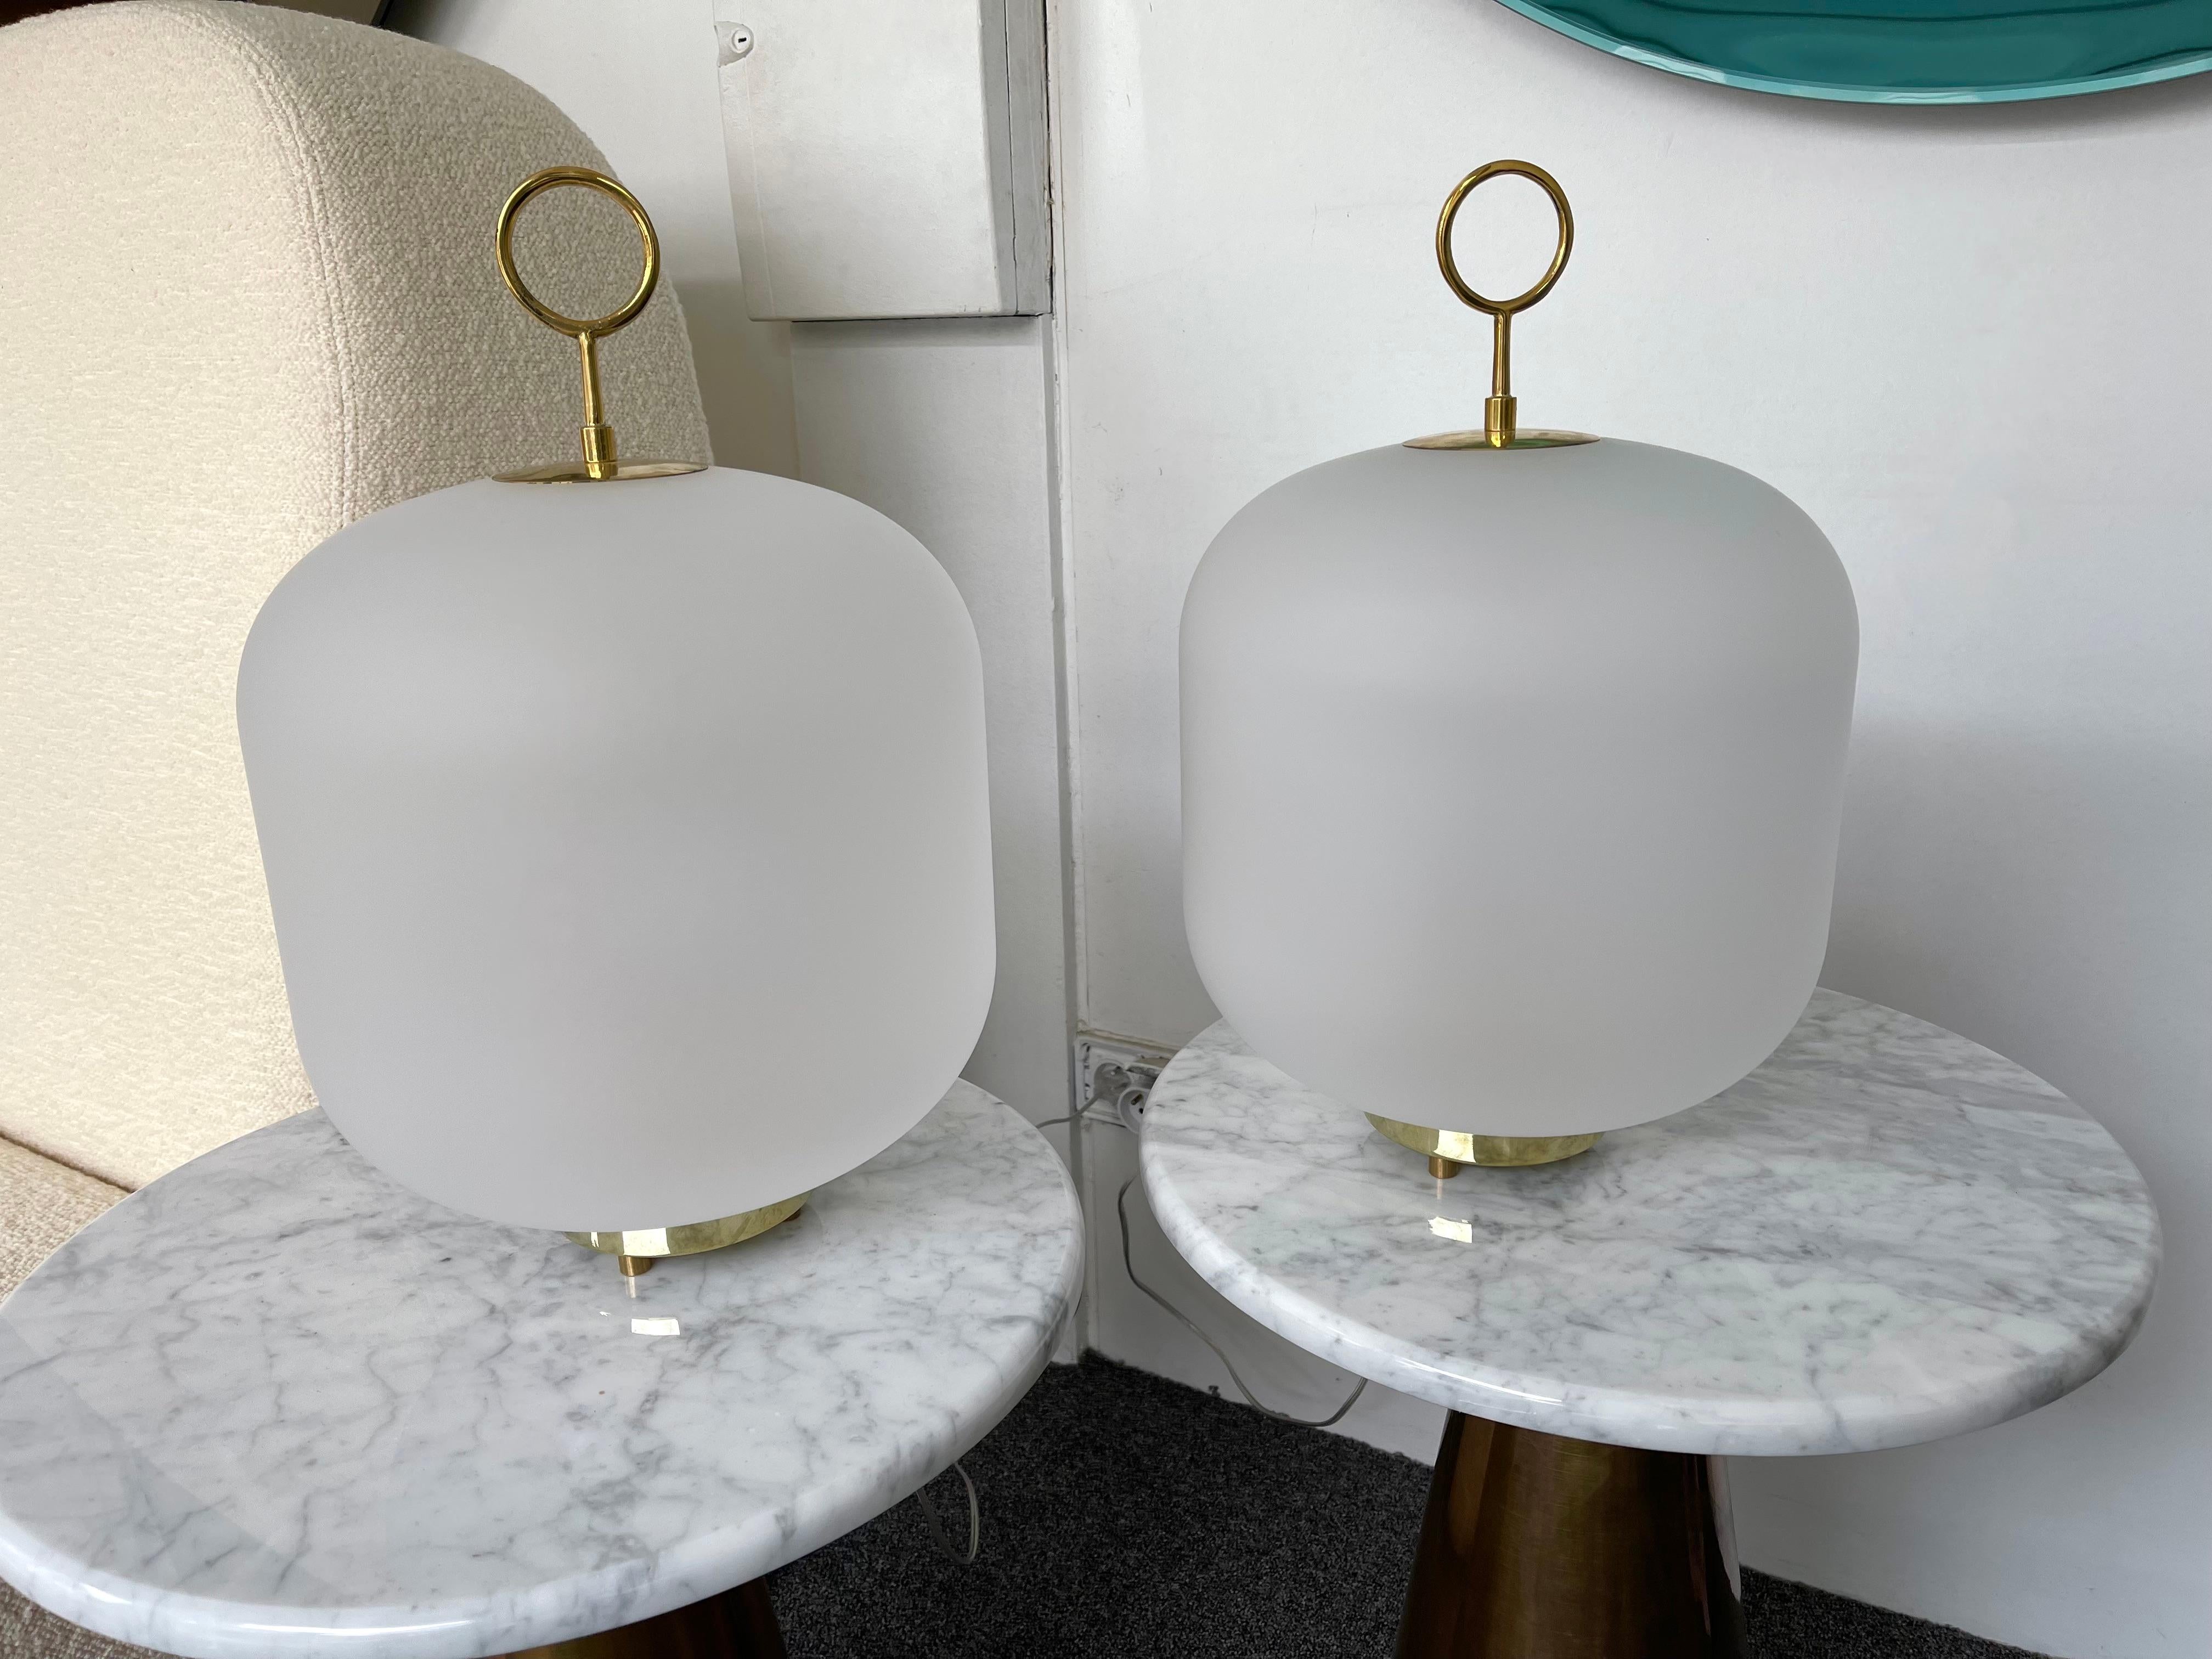 Large size of the Can lamp model, Murano glass and brass. Small artisanal production from Murano. Can be a pair or single lamp. In the style inspiration period of Jean Royere, Stilnovo, Arteluce, 

Price by lamp. In sale separately